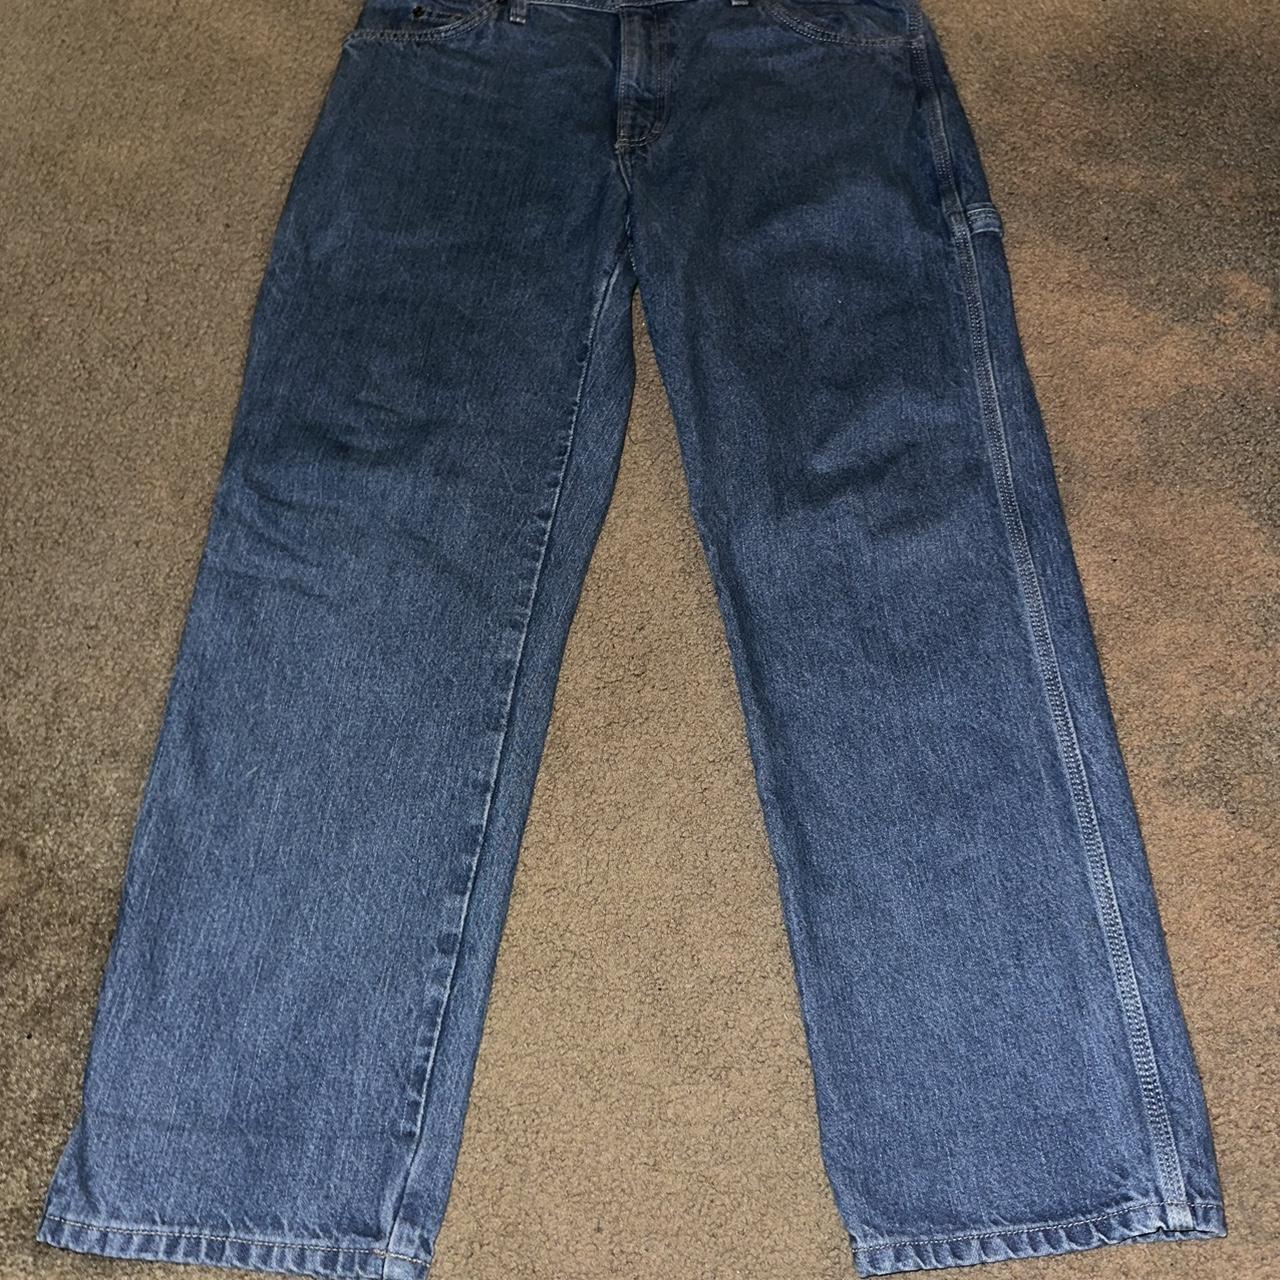 dickies carpenters 34x30 bussin jeans for tha low 😳 - Depop